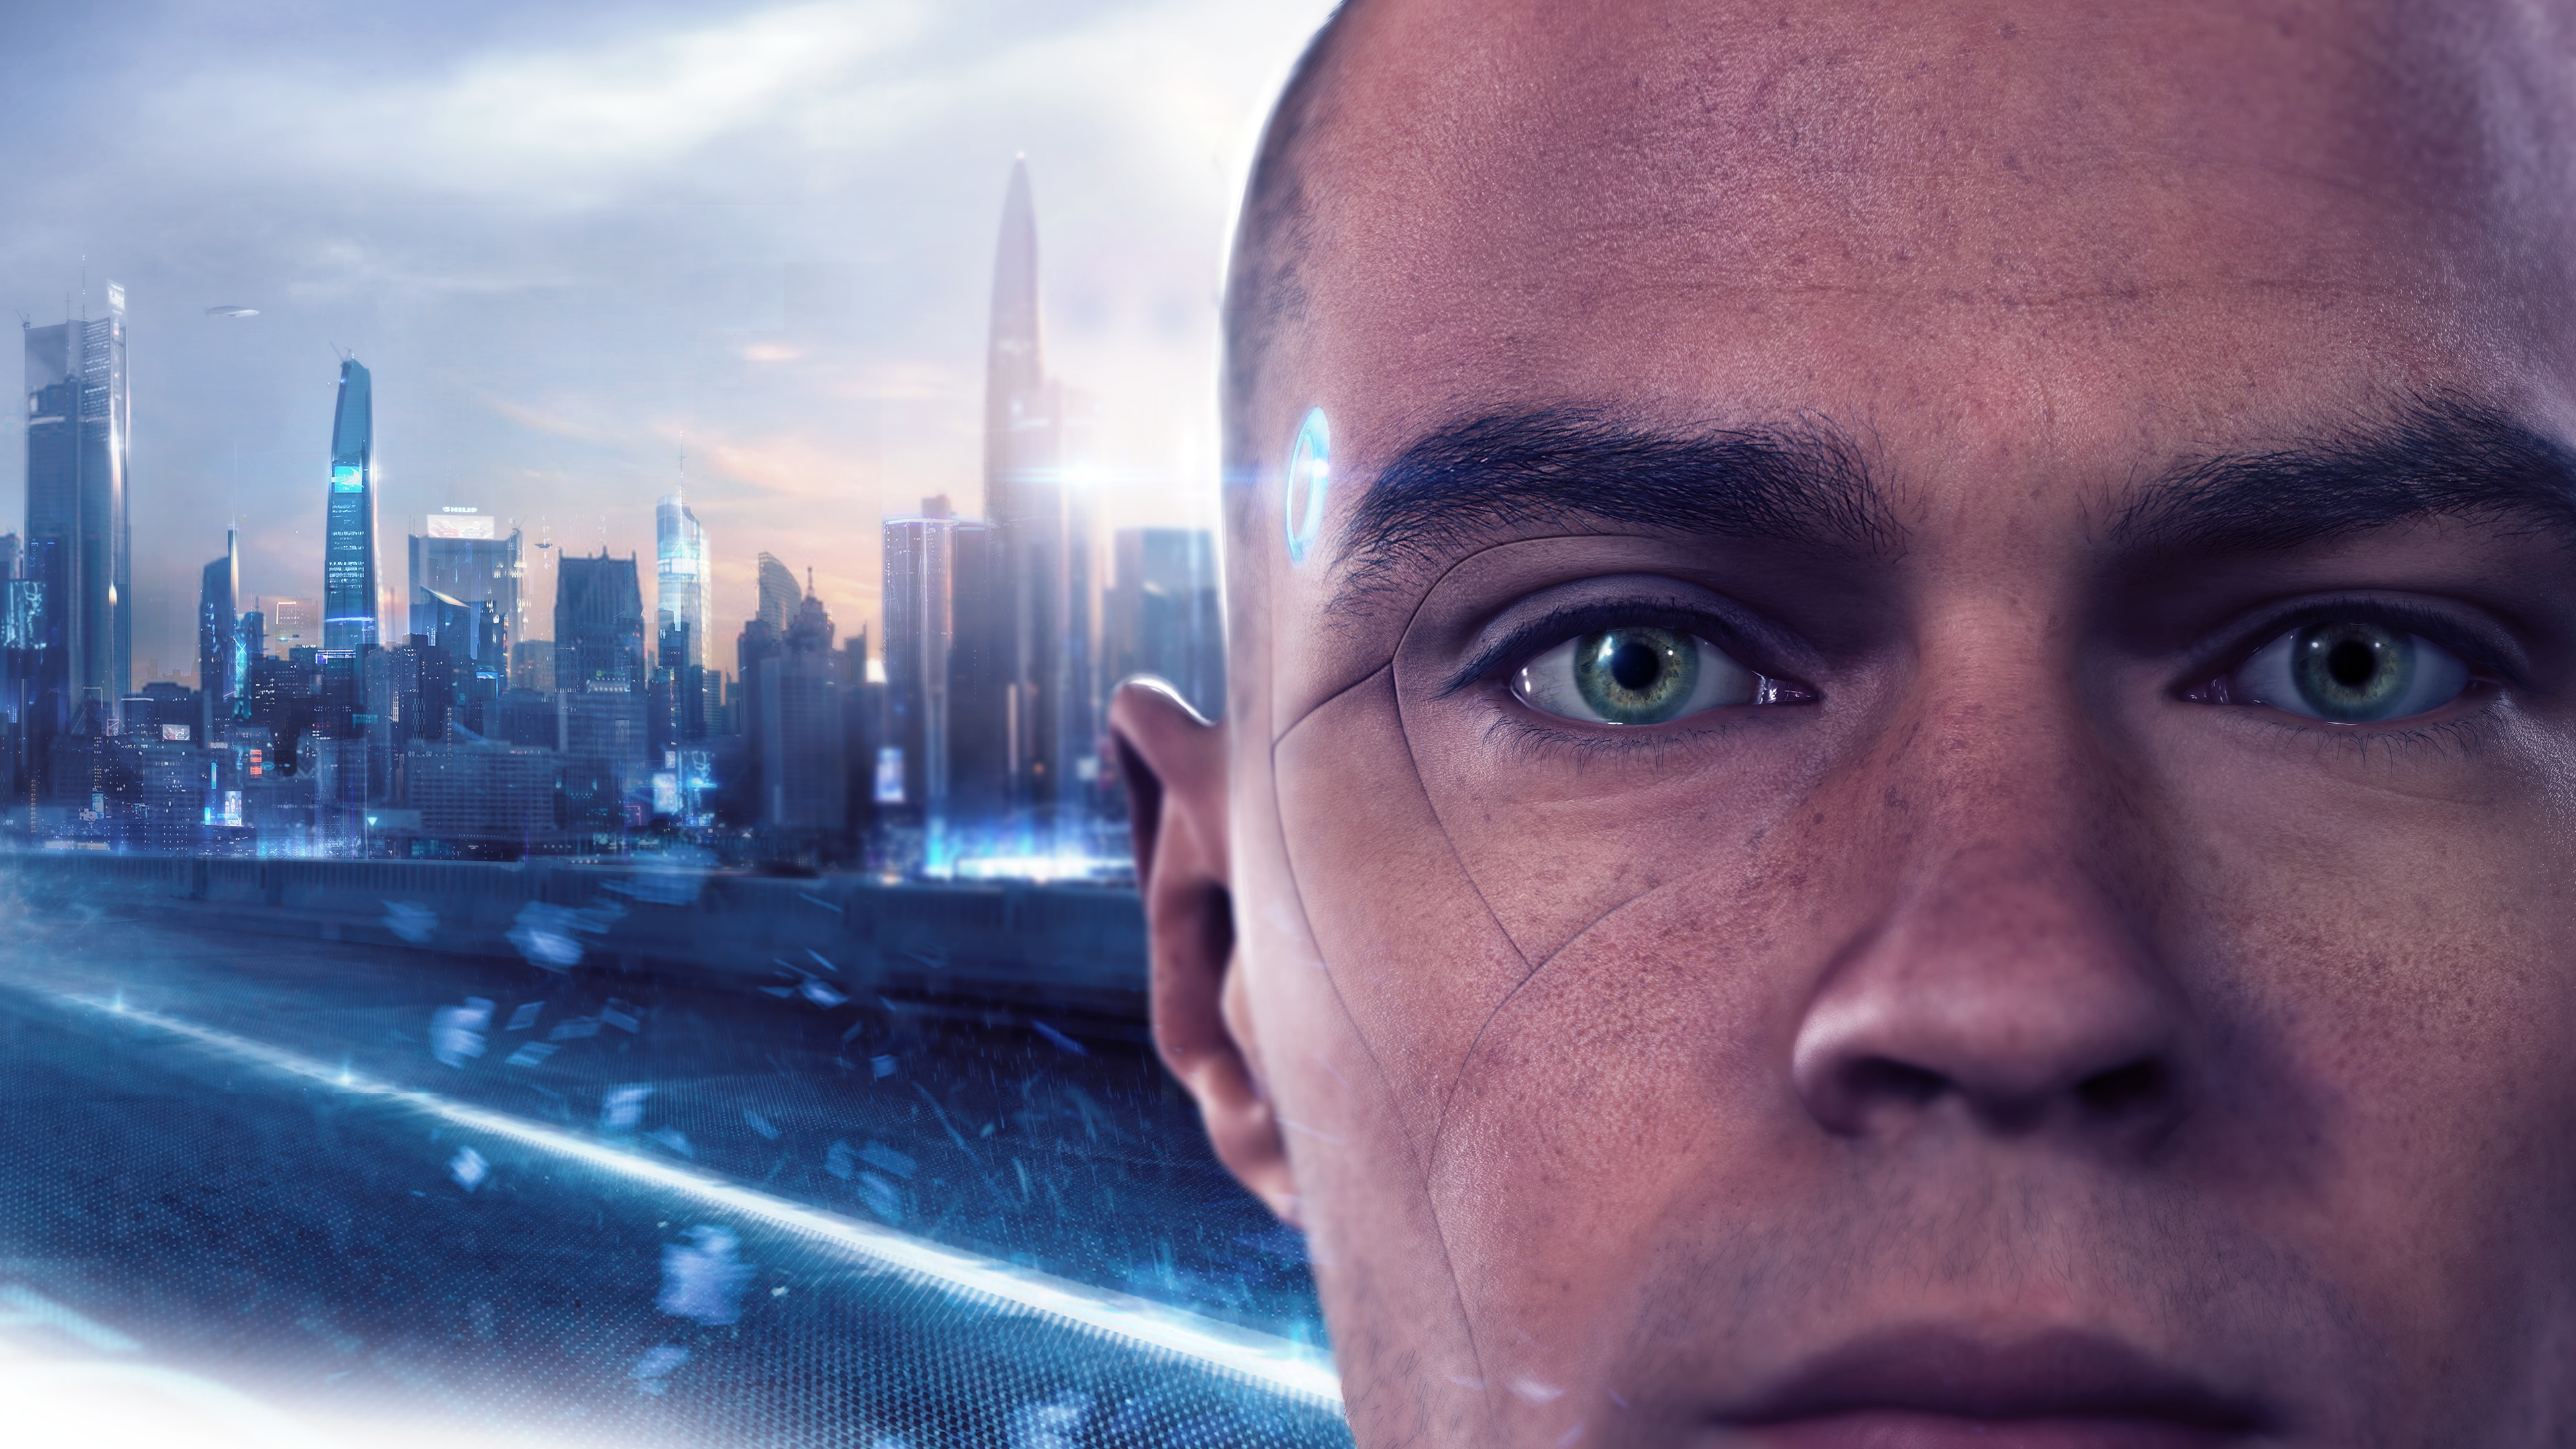 Detroit: Become Human will be supplemented with a manga about androids in Tokyo 